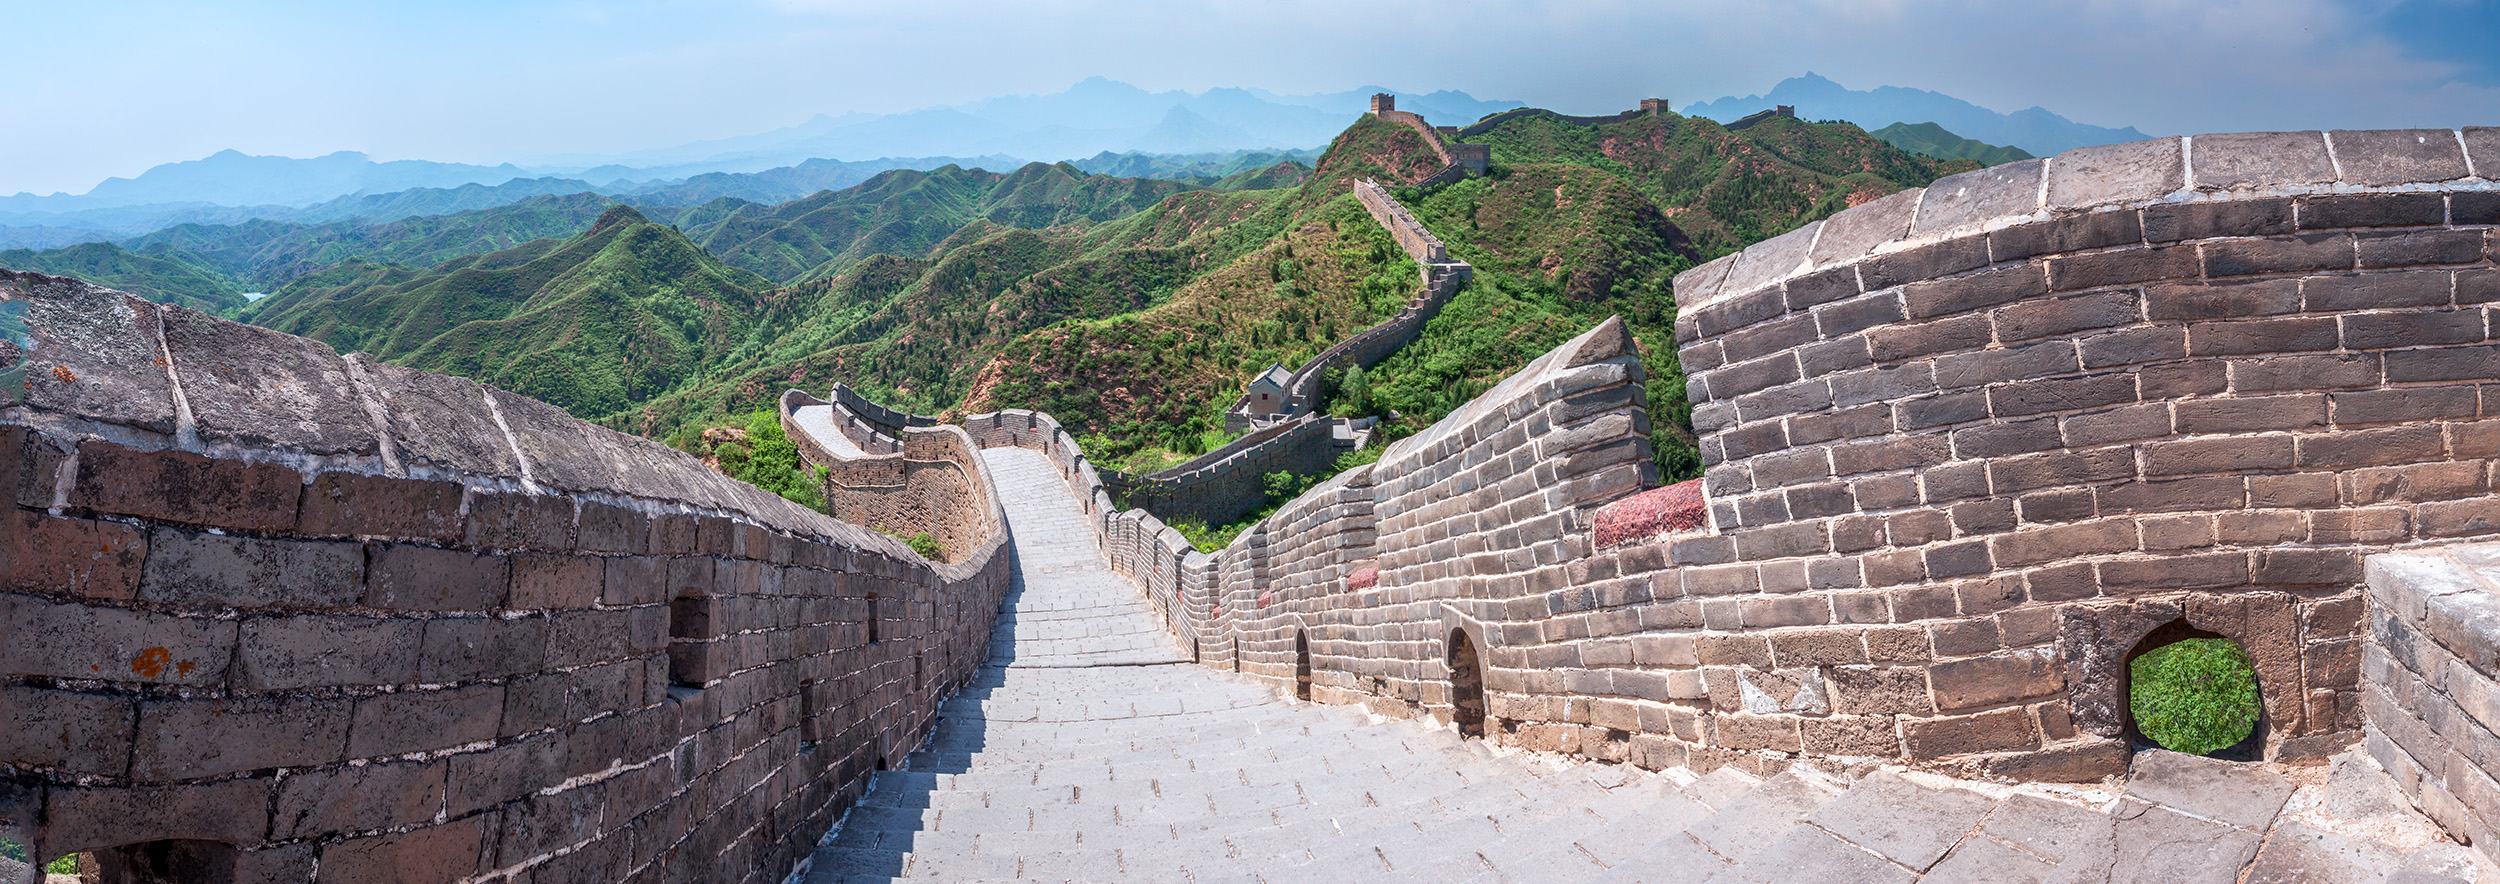 As a child, I was enchanted by stories of the Great Wall of China. Mrs. Hookway, my first-grade teacher, described it as a monumental...